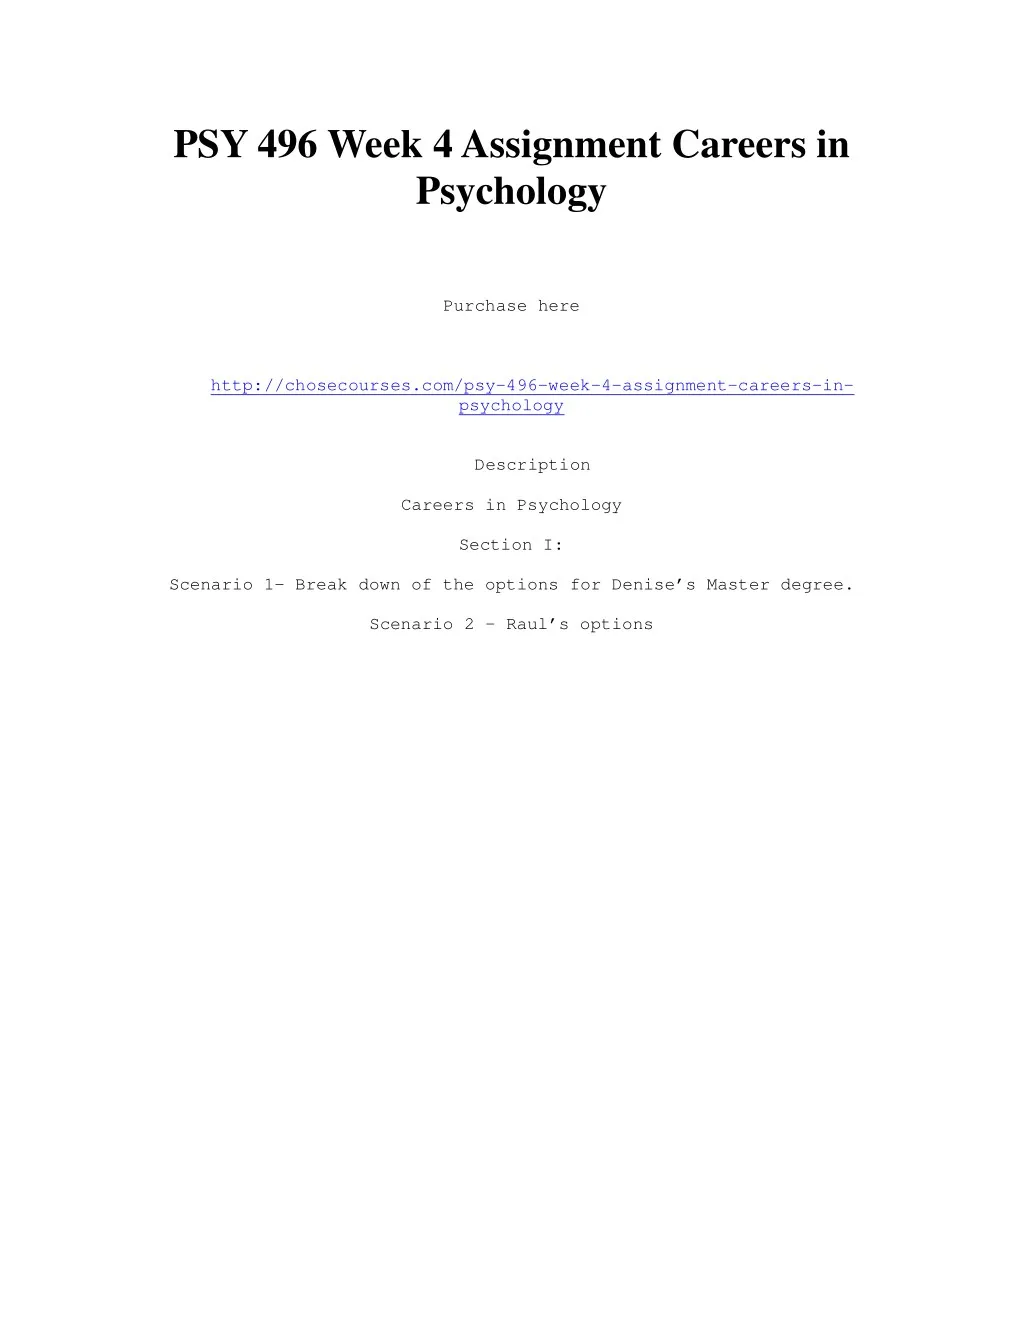 psy 496 week 4 assignment careers in psychology